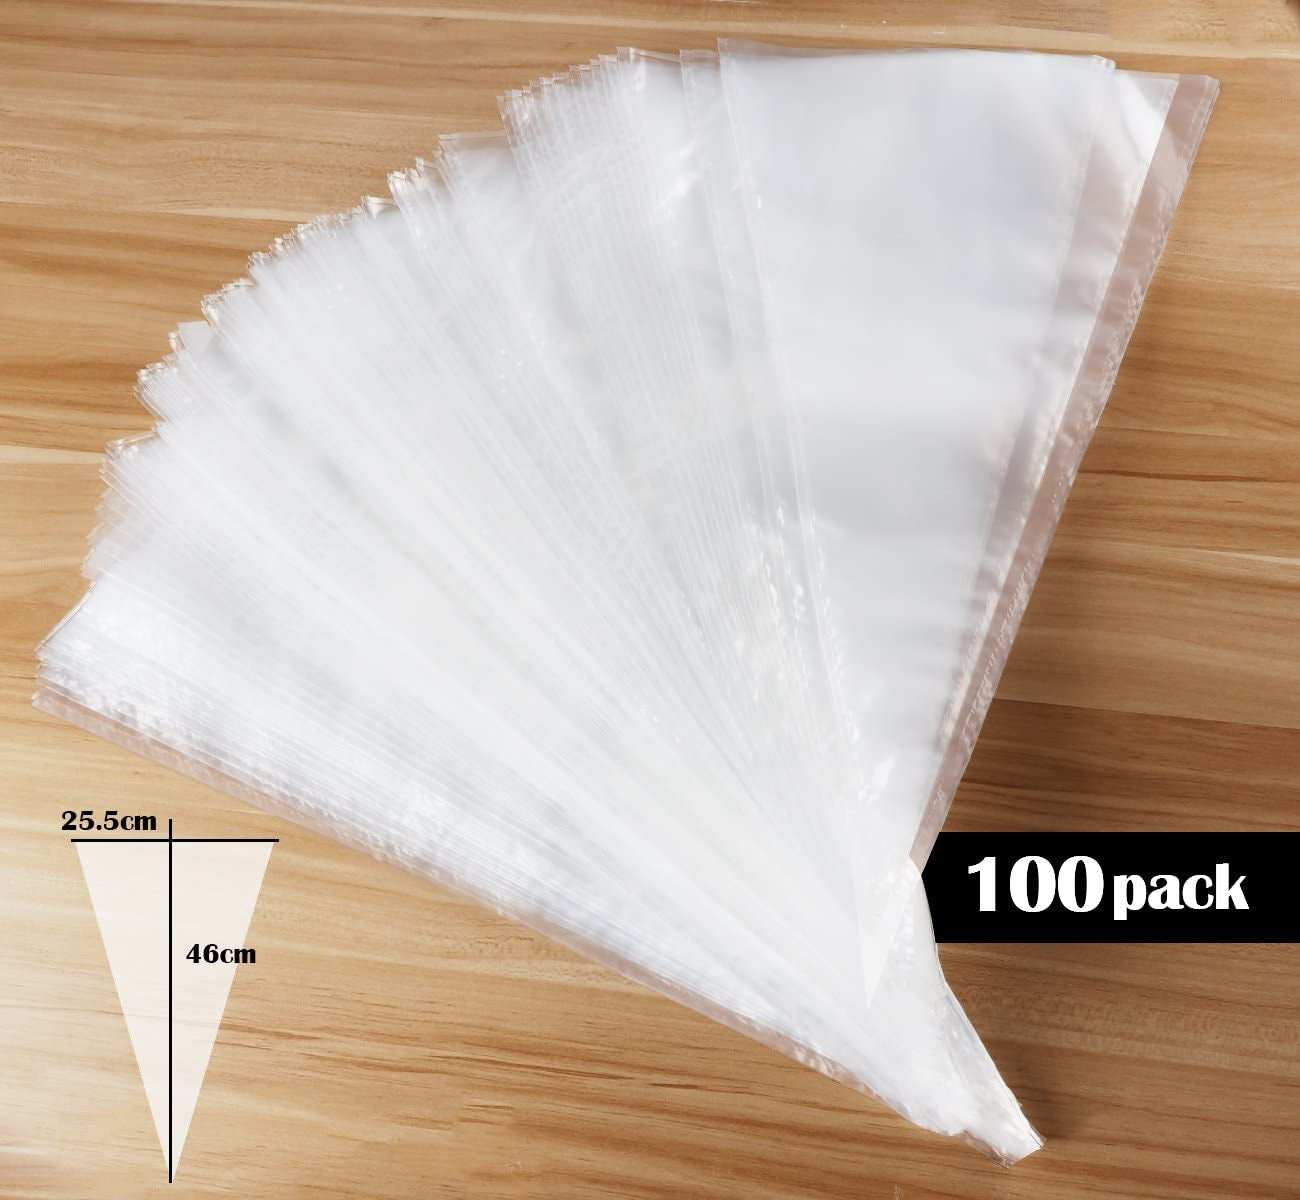 100 Pack Pastry Bags Thickened 18-Inch Disposable Decorating Icing Piping Bags with 4 Icing Bag Ties